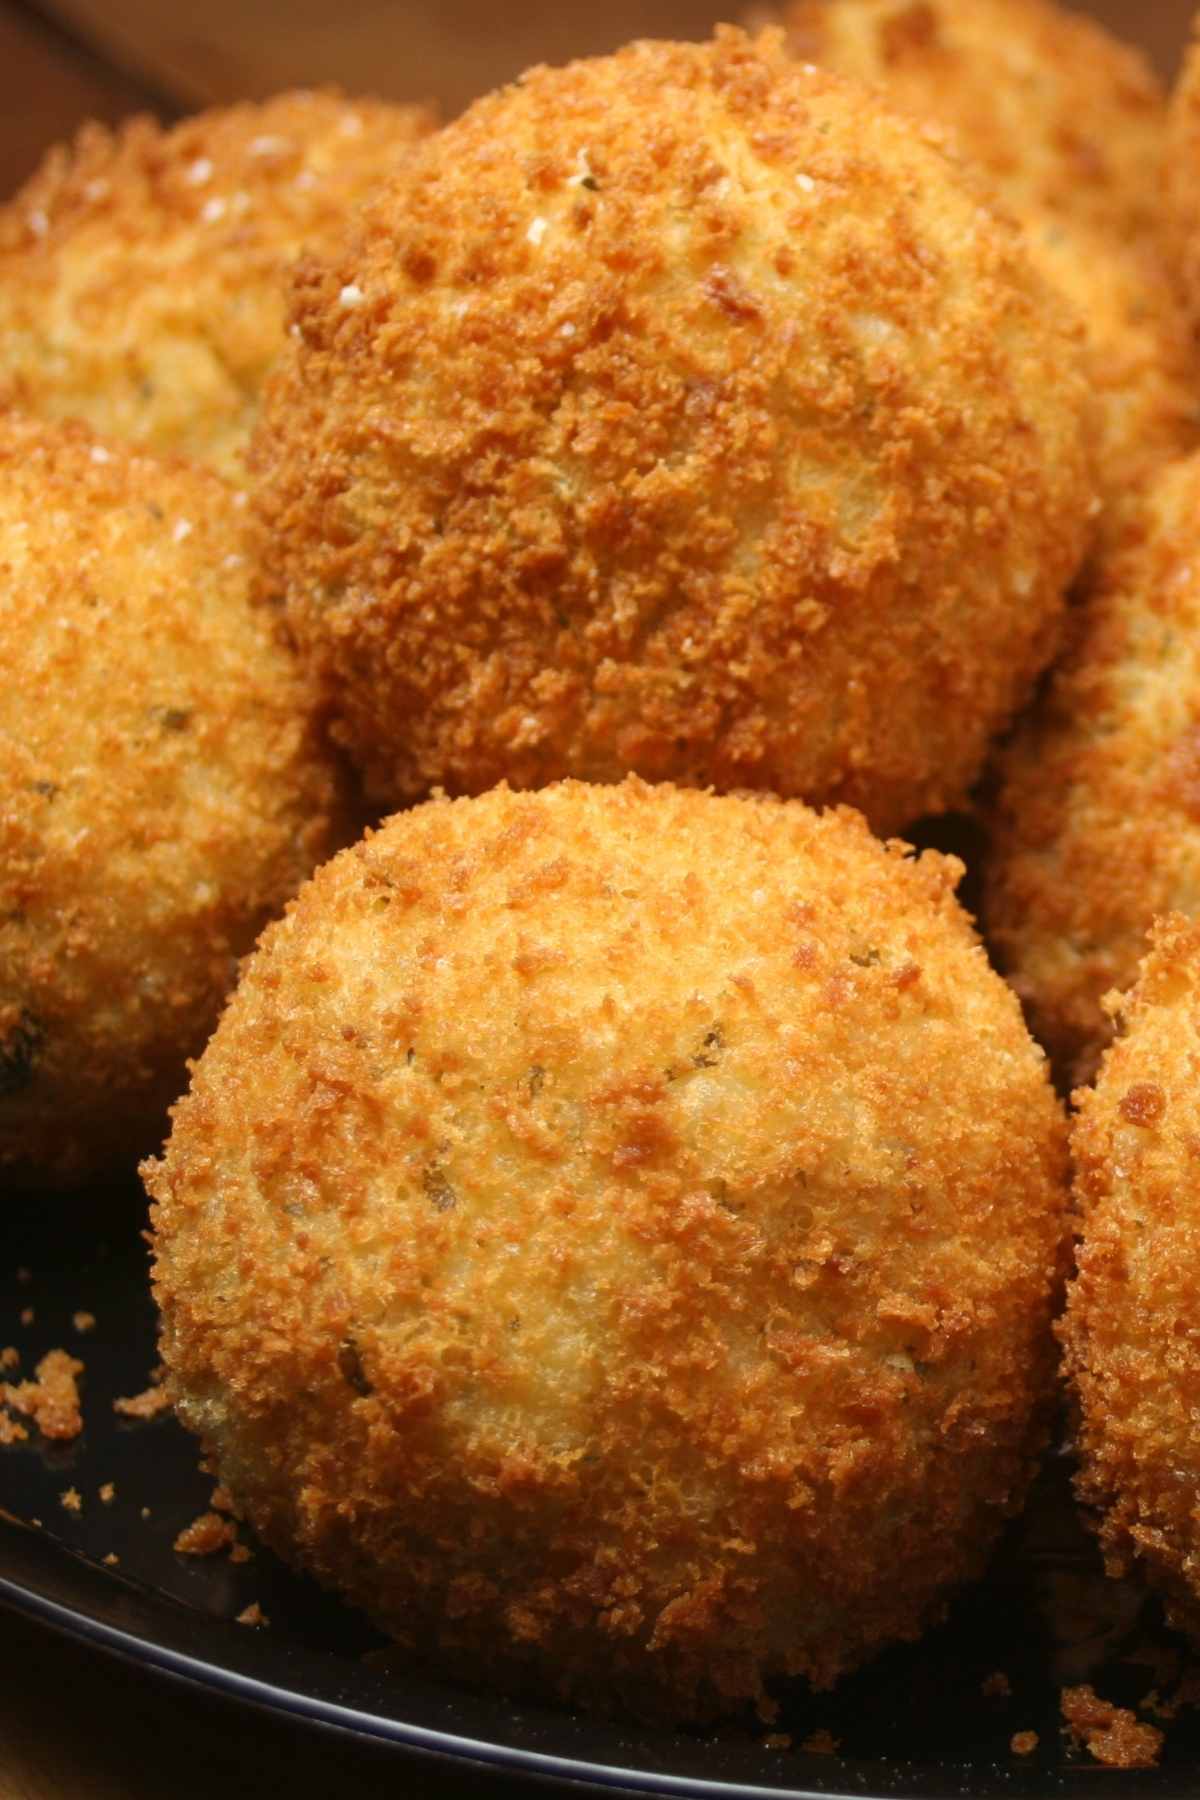 If you haven’t experienced the deliciousness of Italian Rice Balls, you’ve been missing out! They’re creamy and cheesy on the inside and perfectly crisp on the outside.